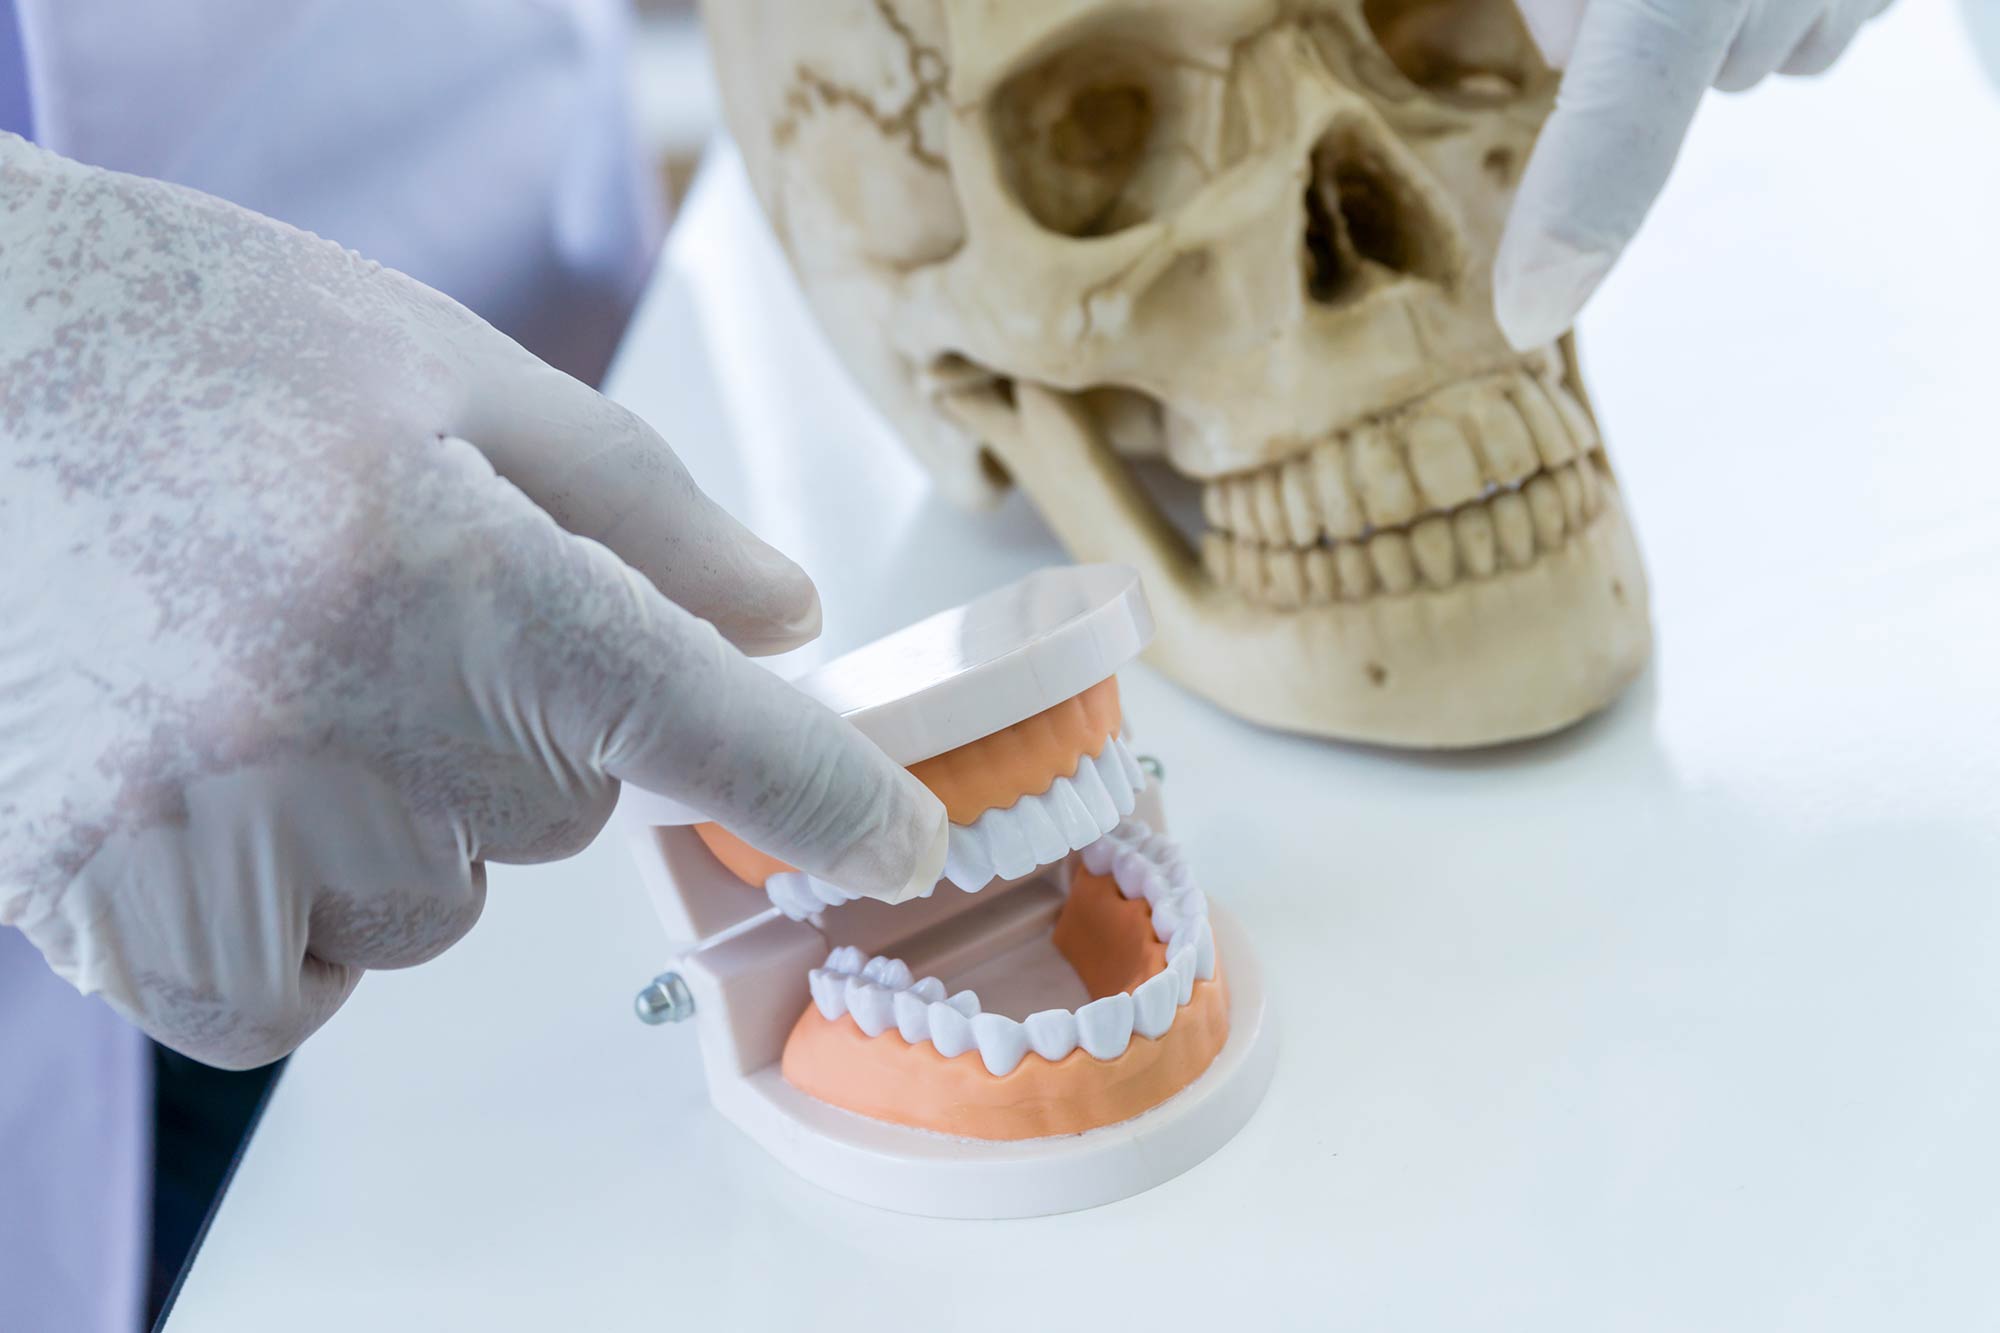 Katherine Pearce talks about her role and experiences in forensic dentistry